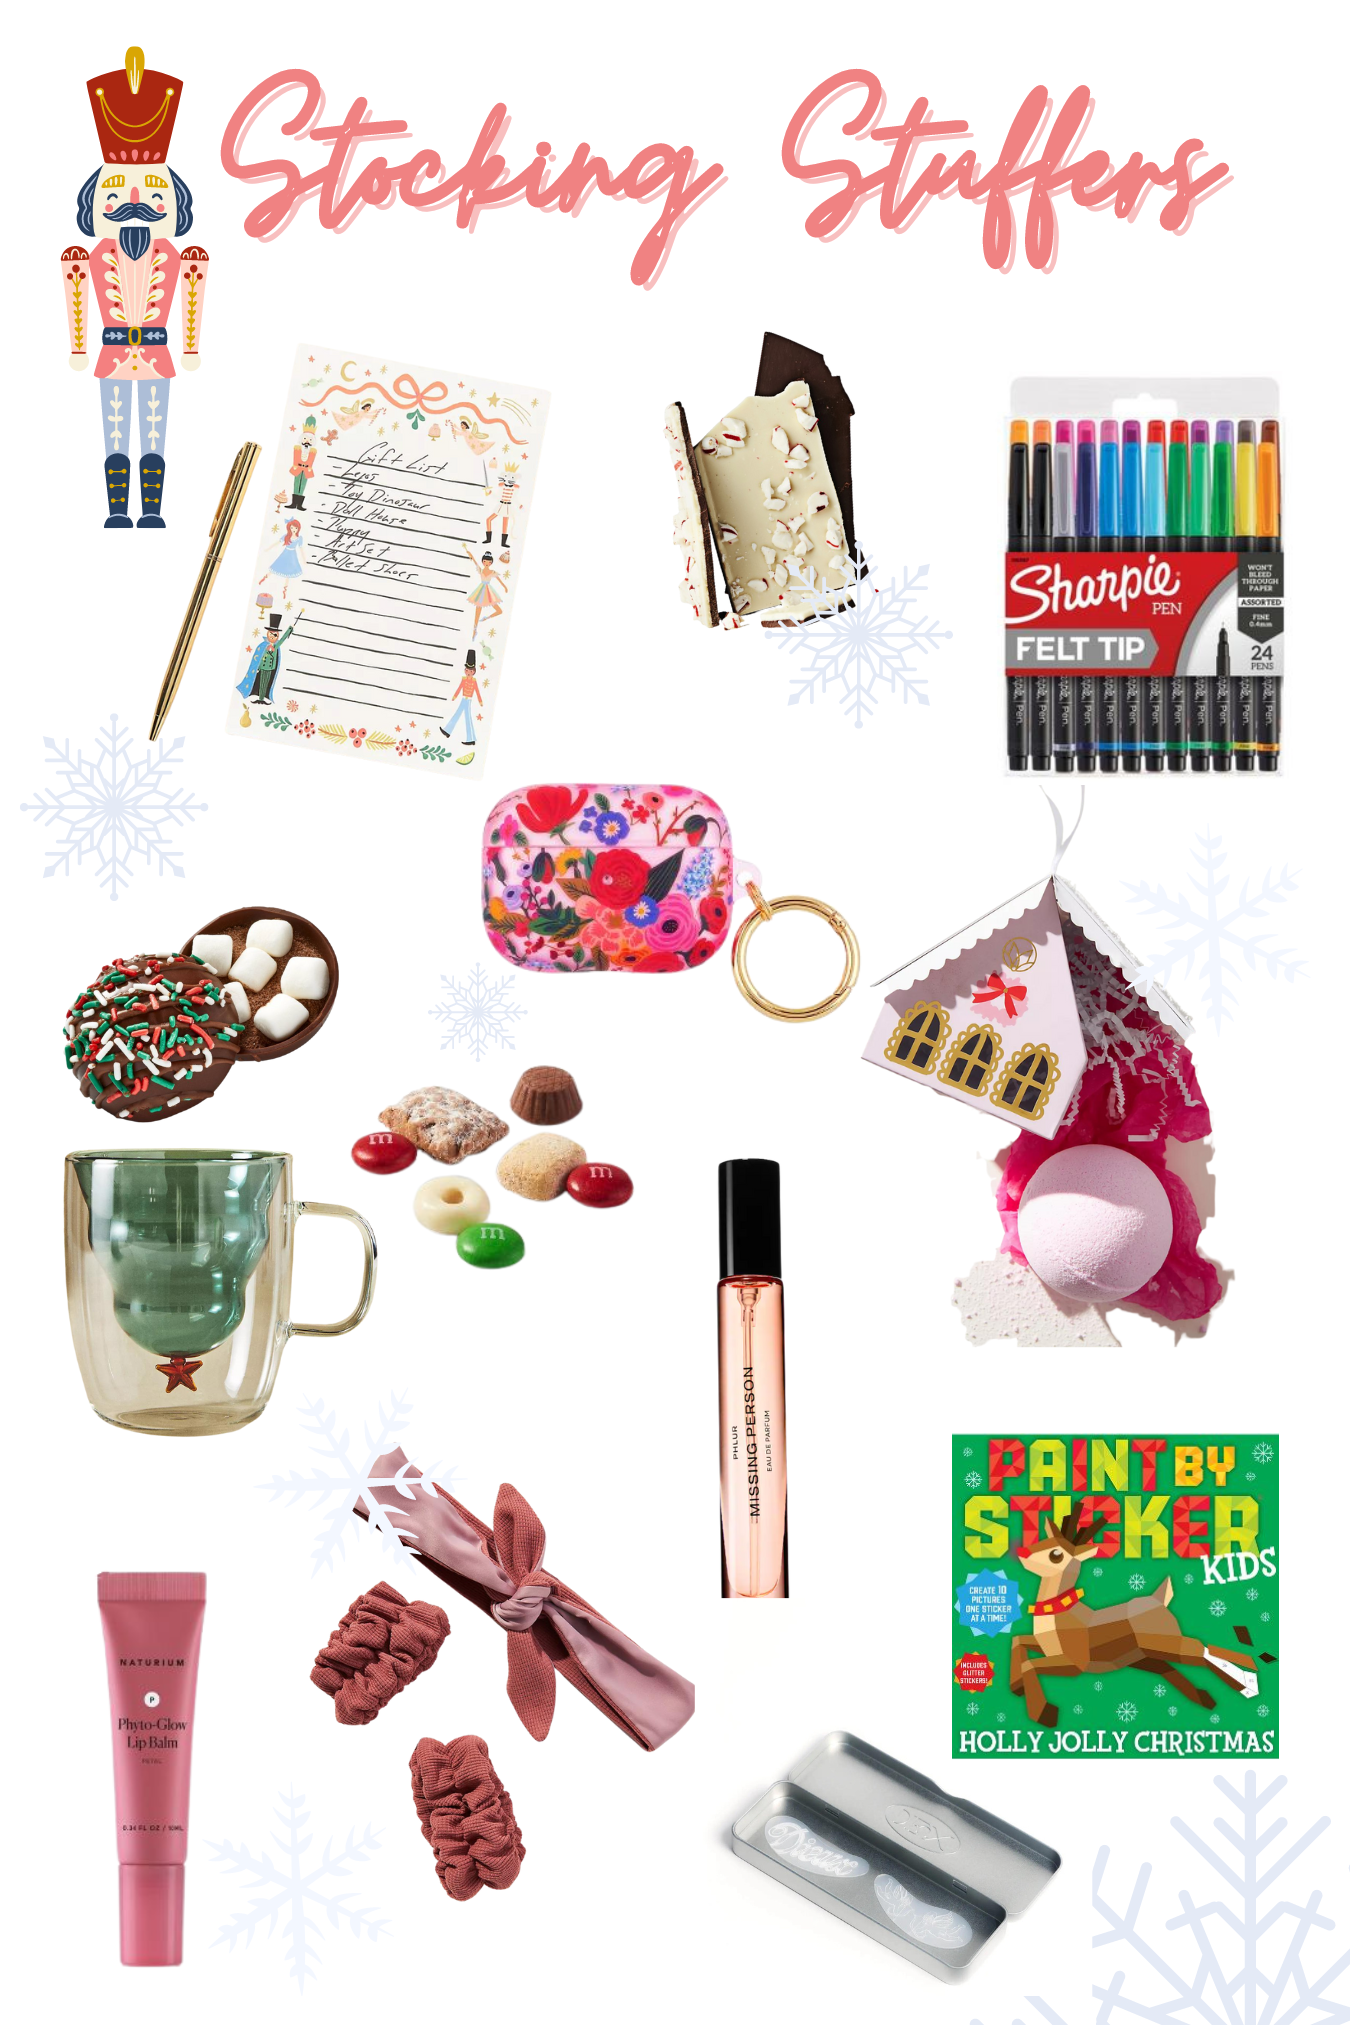 Holiday Gift Guide Stocking Stuffers